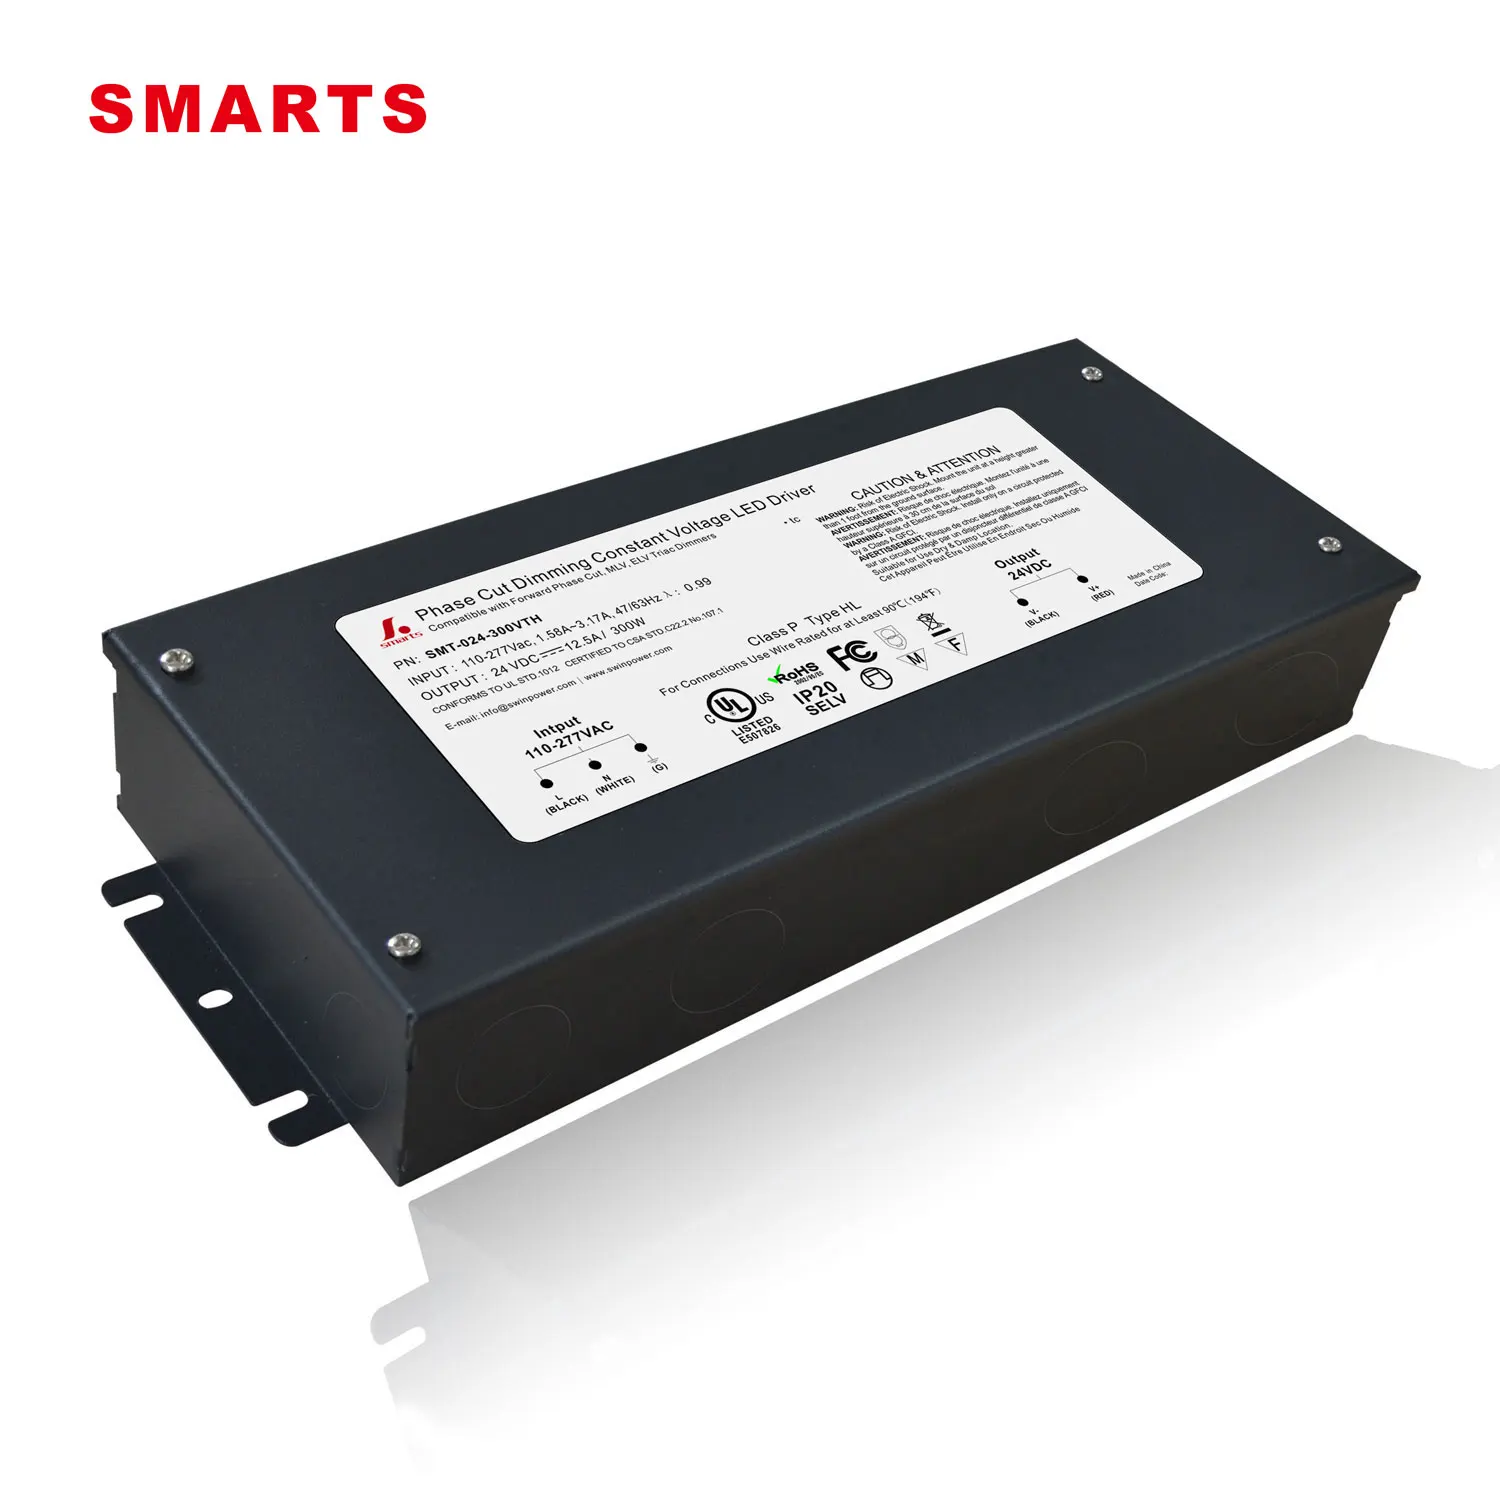 constant voltage fcc 300w triac dimmable led driver for trailing leading ELV MLV dimmer